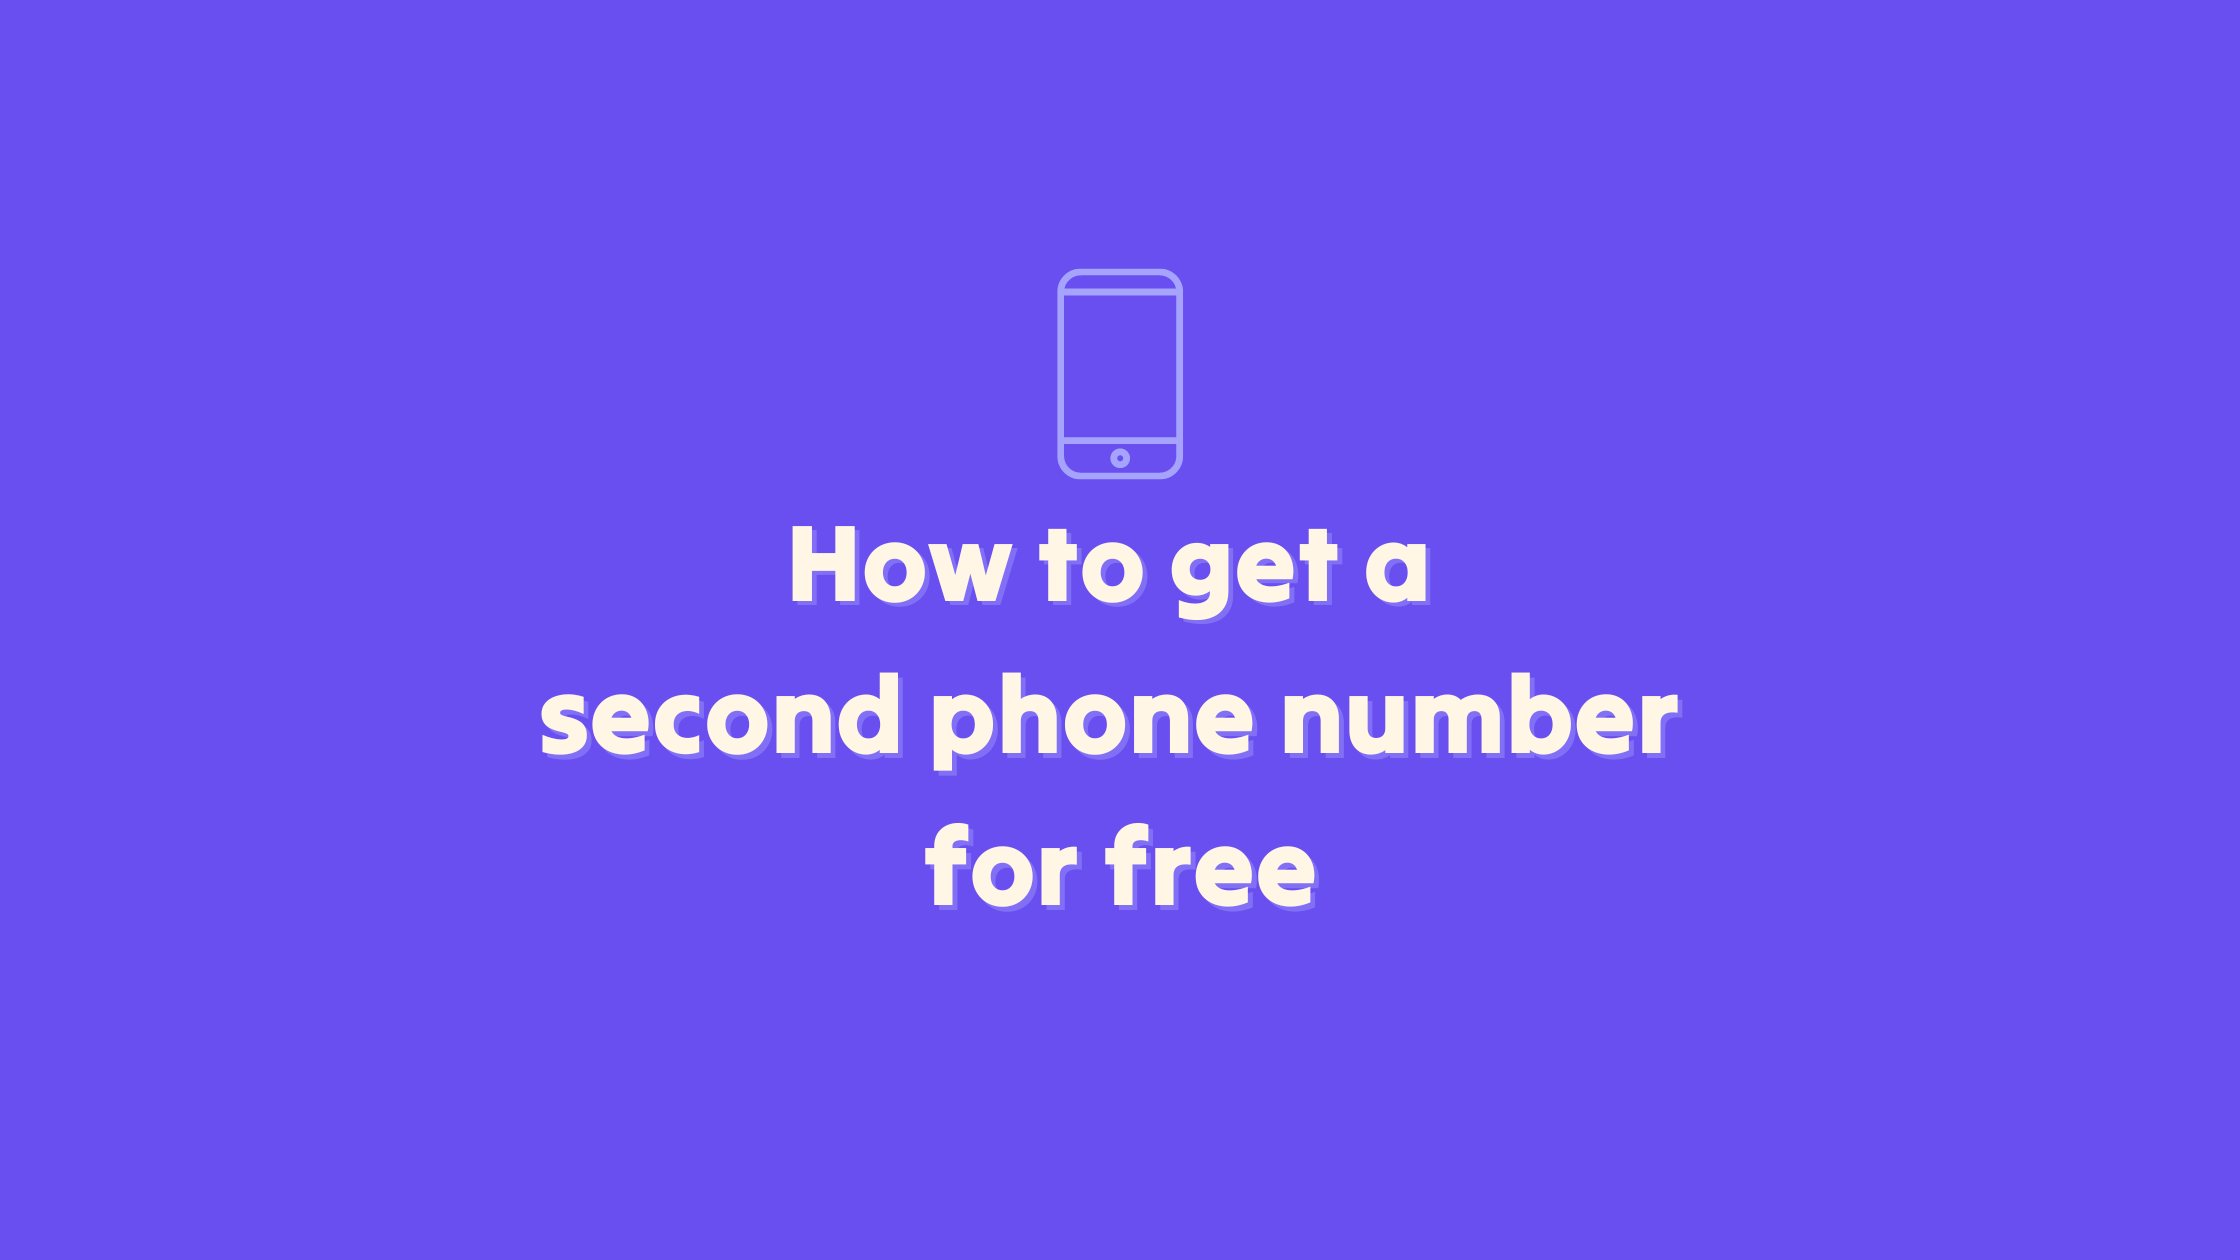 Purple background with graphic of a smartphone and a title of How to get a second phone number for free